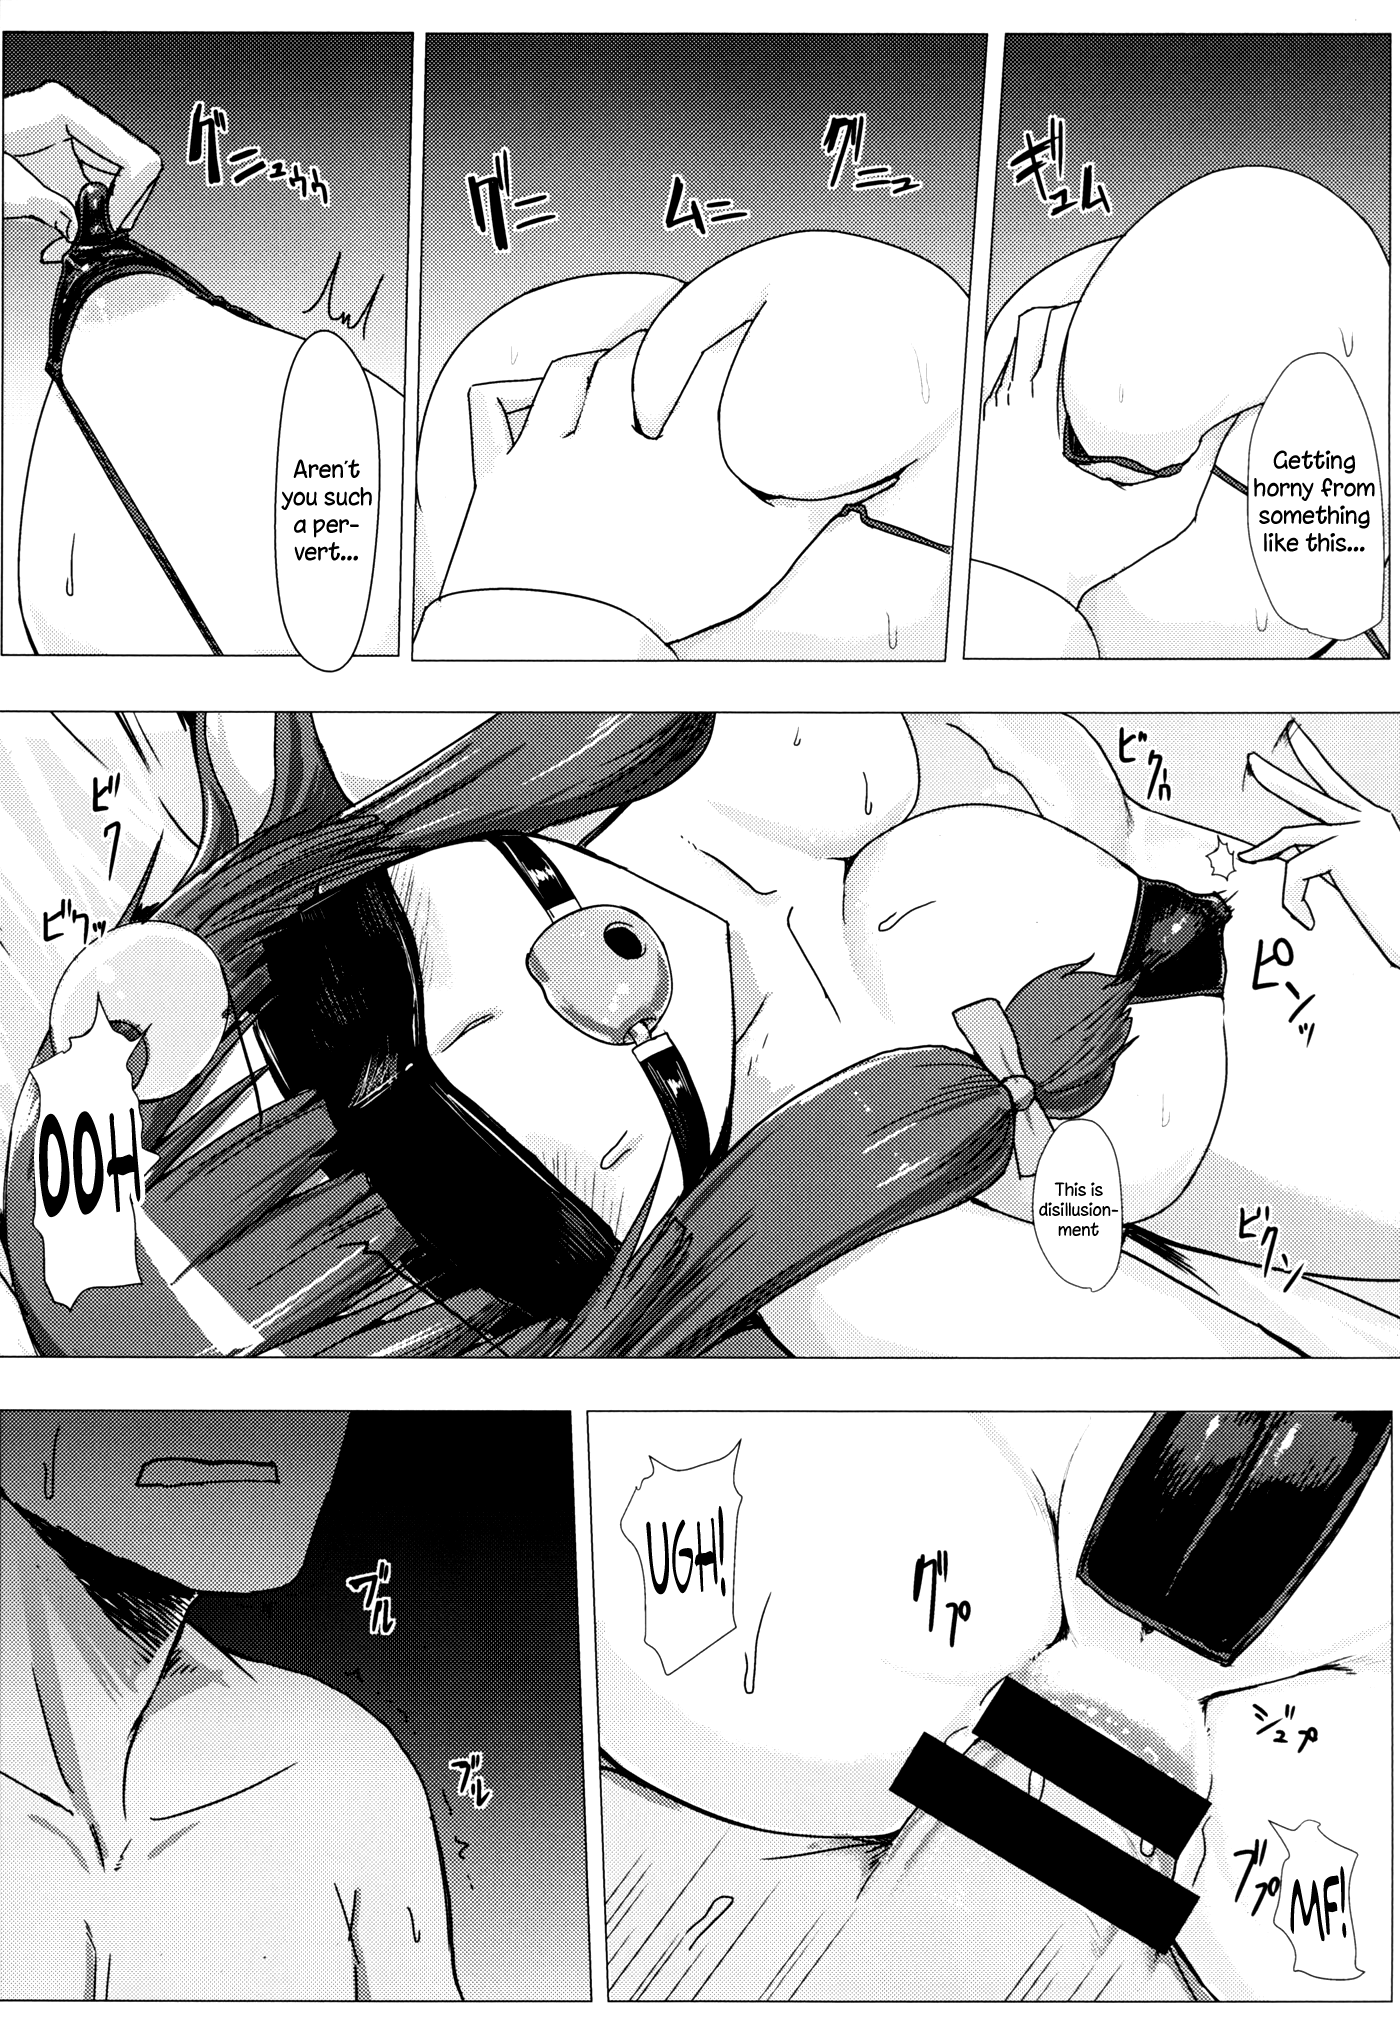 Ass Patchy Patchy hentai manga picture 7